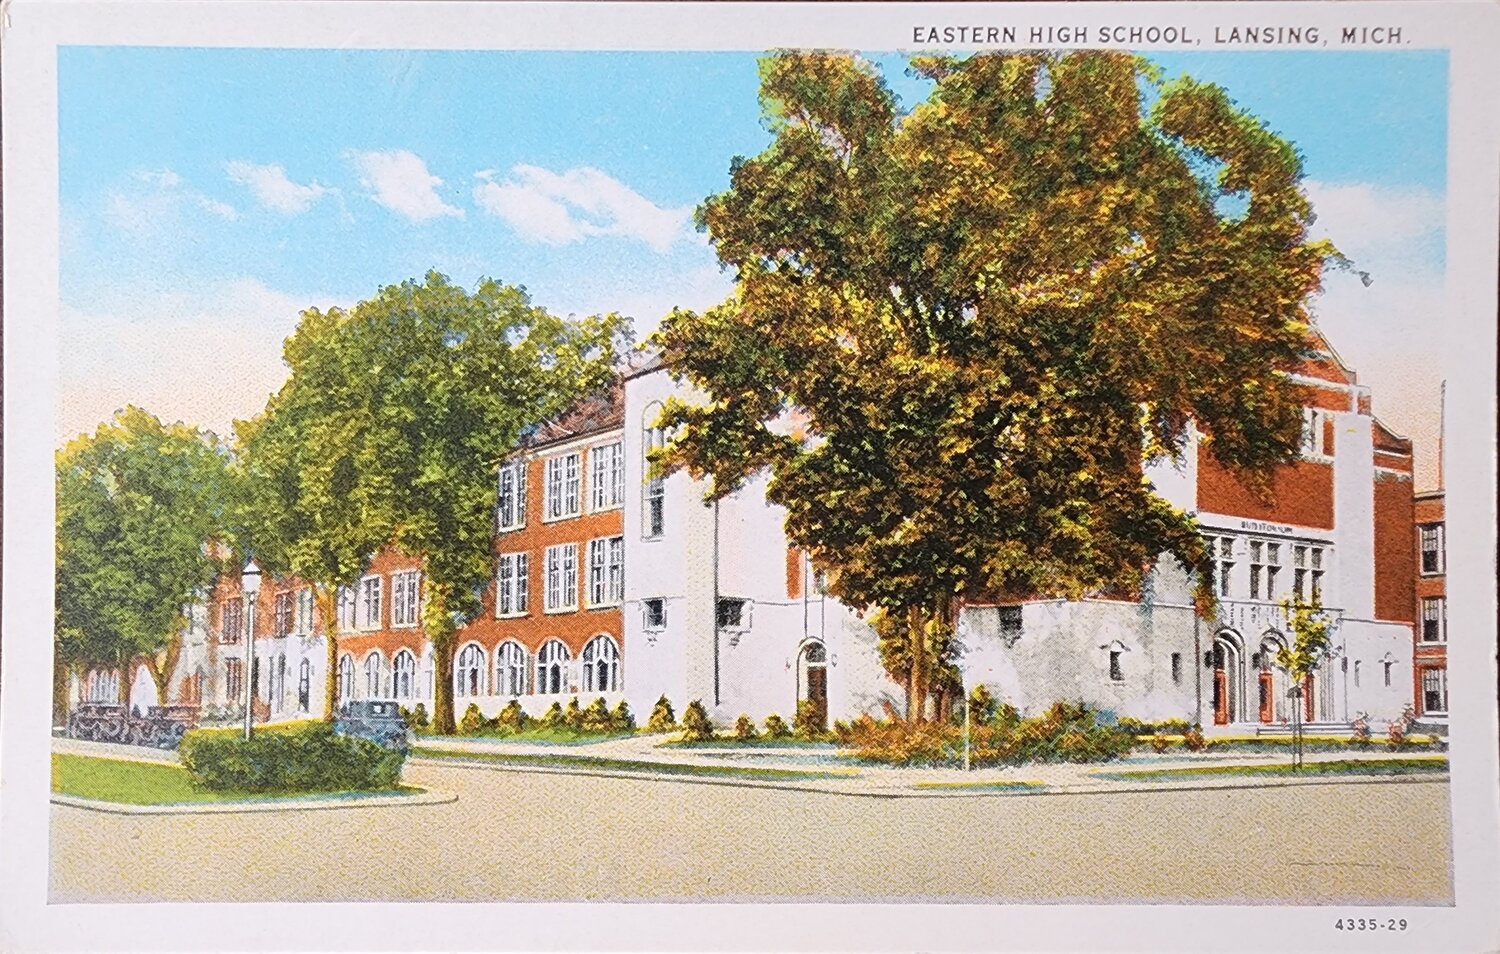 Old Eastern High School as it looked soon after completion in 1928. Pennsylvania Avenue, on the left, featured green islands. The entrance to the school auditorium is on the right along Jerome Street. Its architects, Pond & Pond, were brothers who studied at the University of Michigan. The building’s fate is in the hands of U of M’s regents.